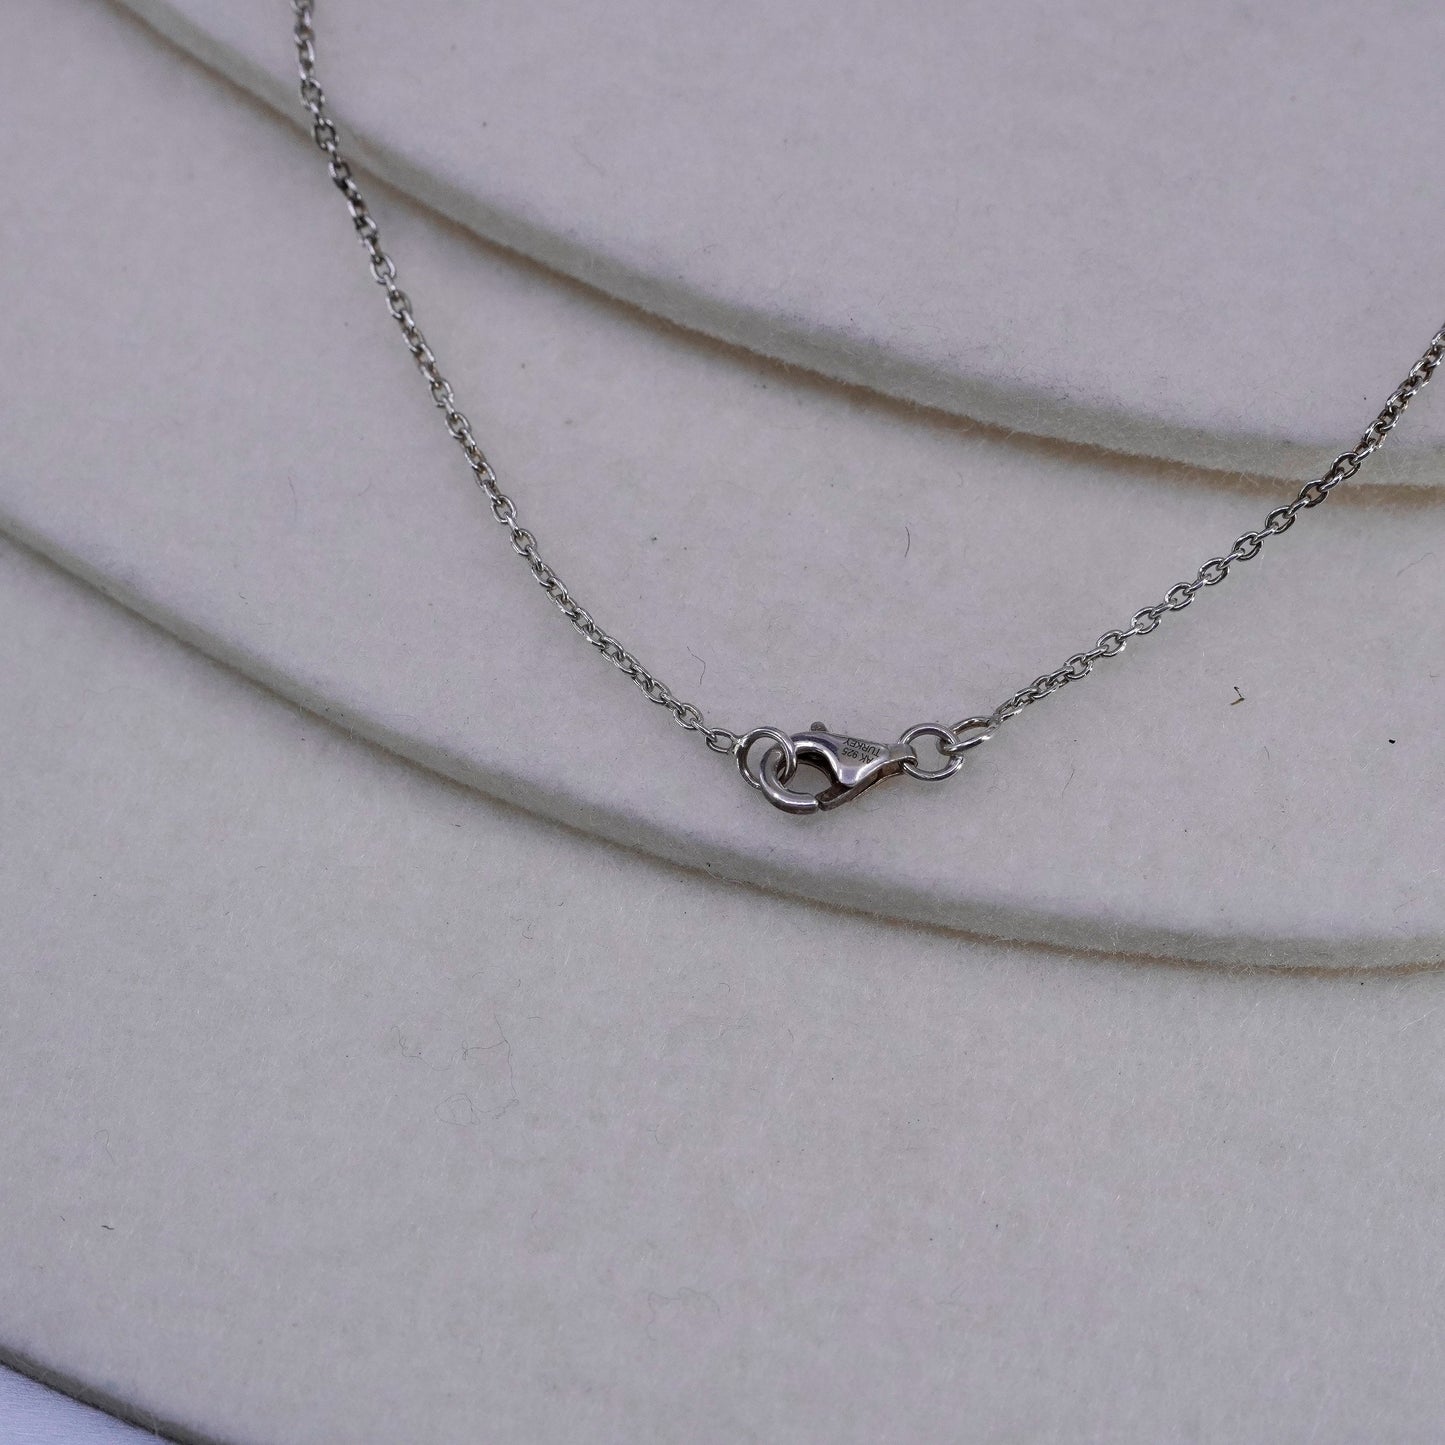 18”, Sterling 925 silver handmade circle chain necklace with fringe pendant